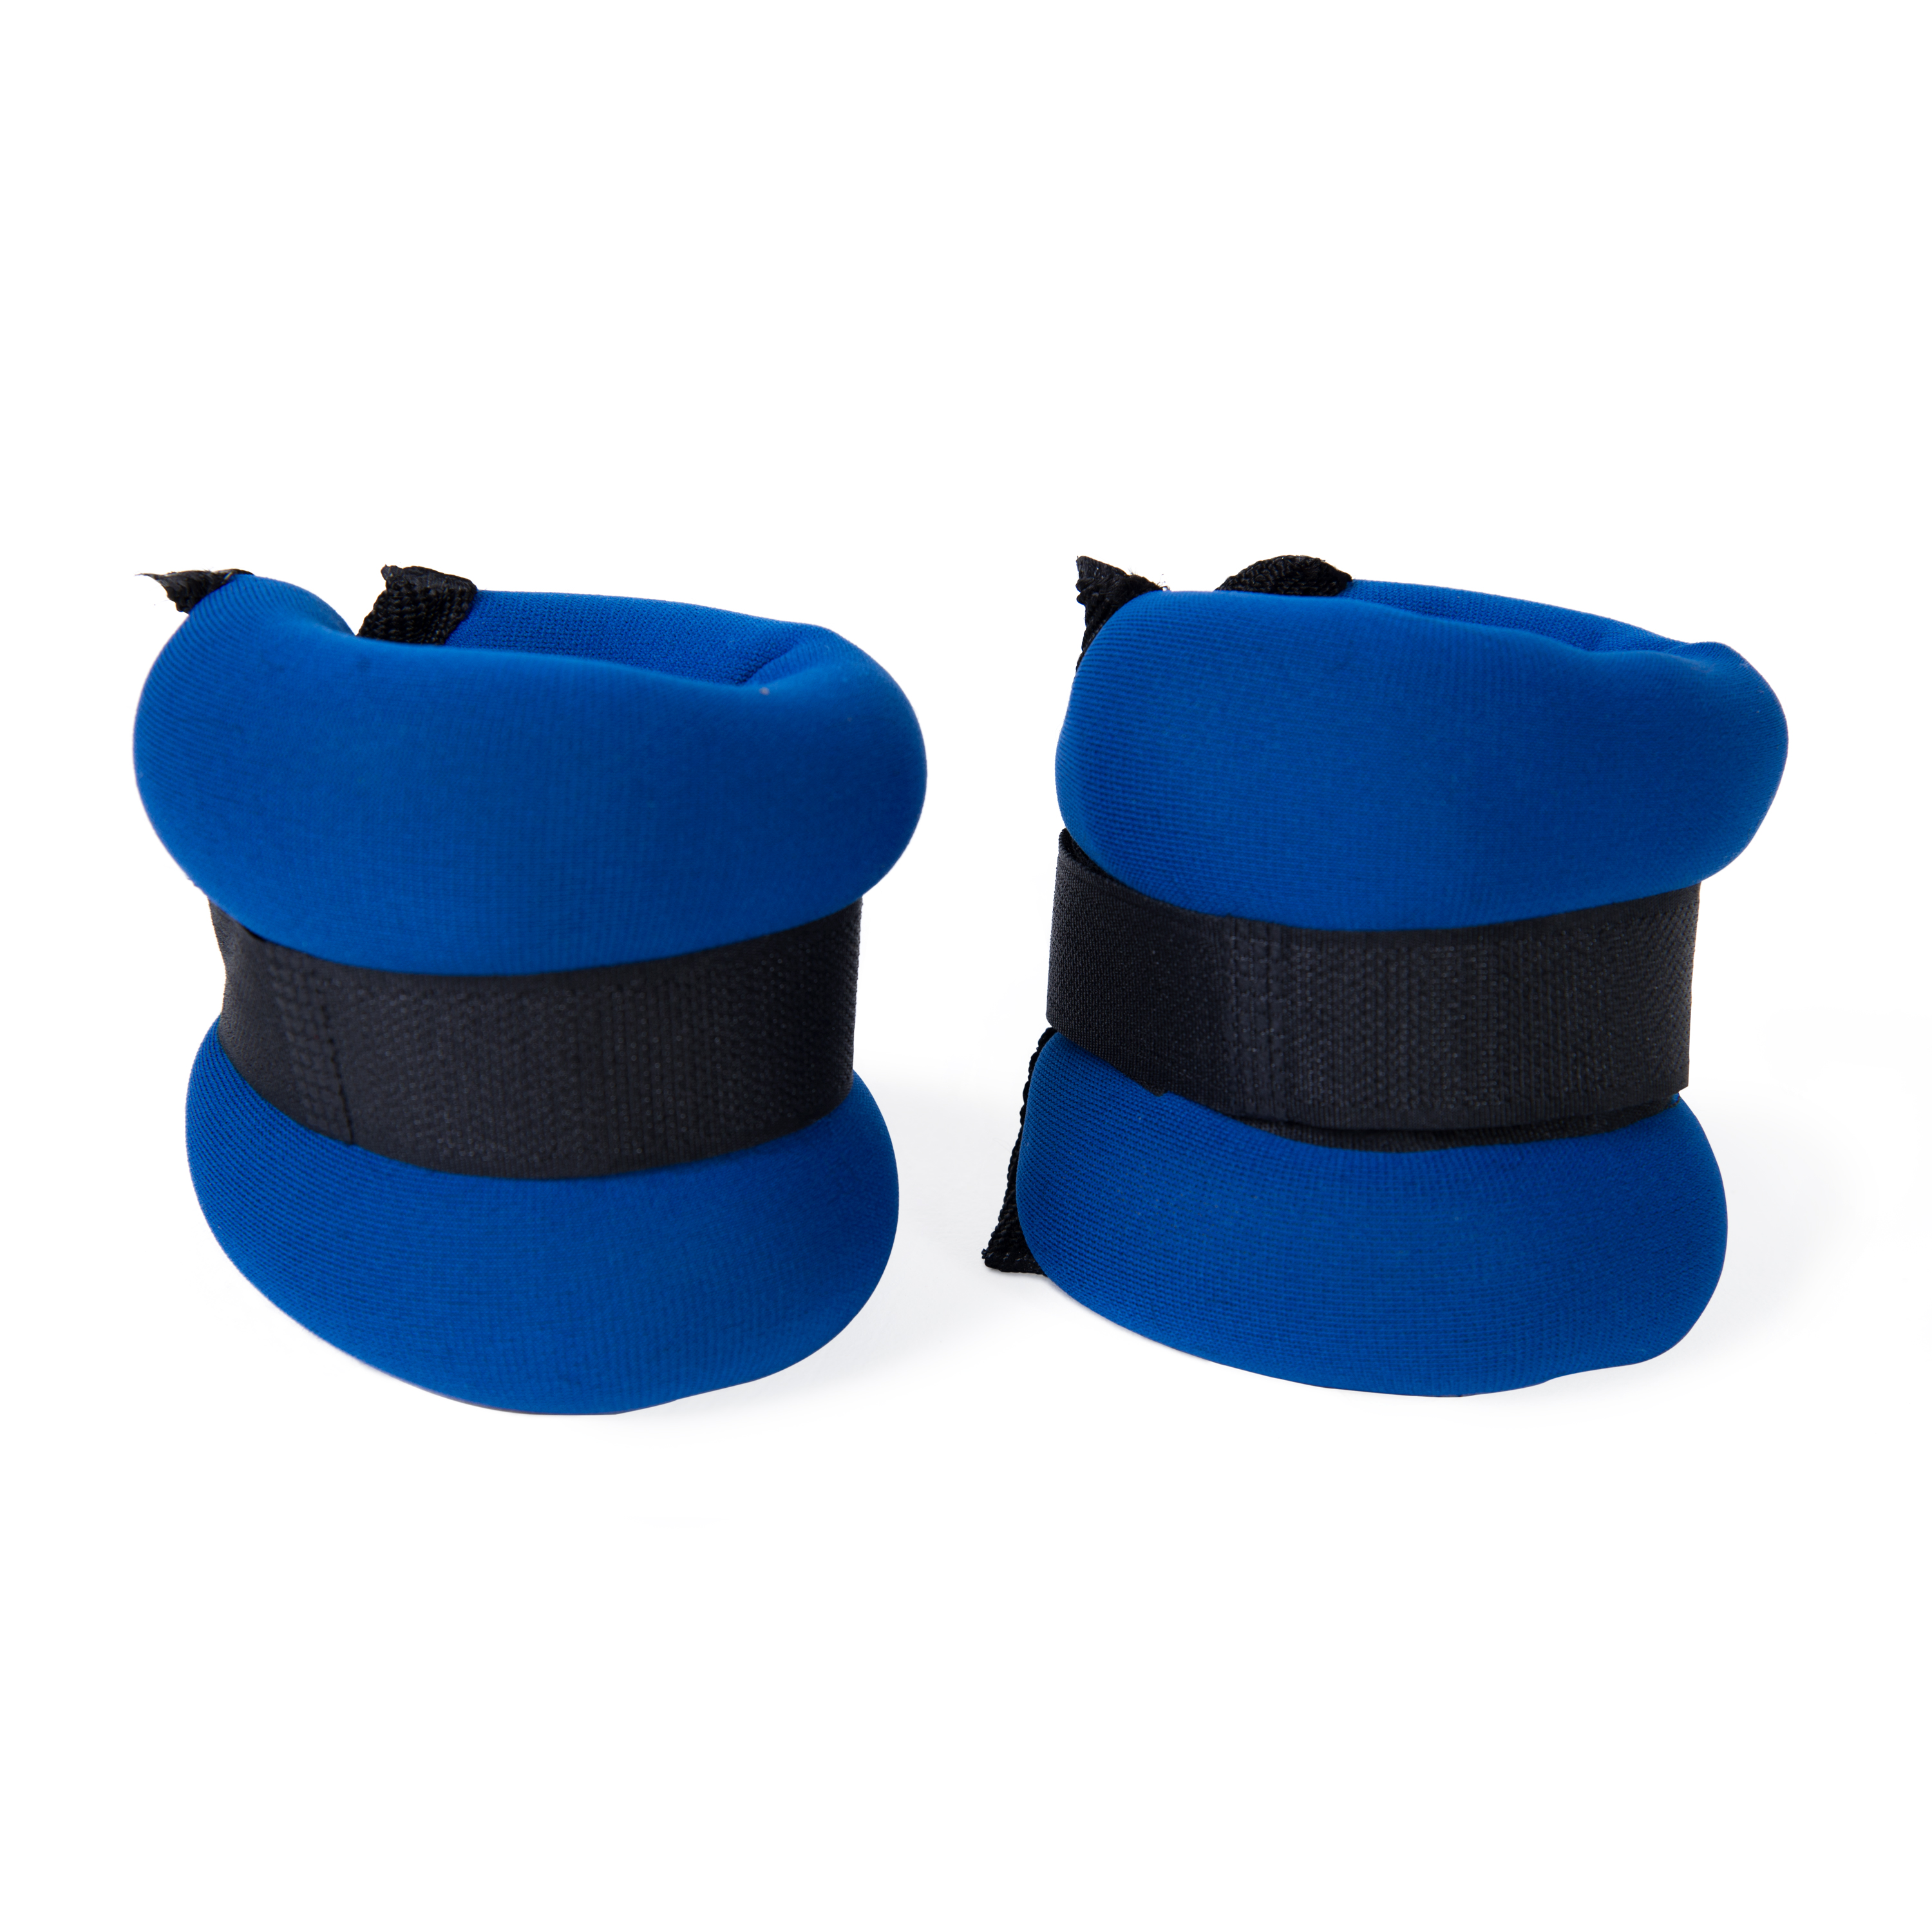 CAP Fitness 2 lb Pair of Ankle Weights - image 2 of 2